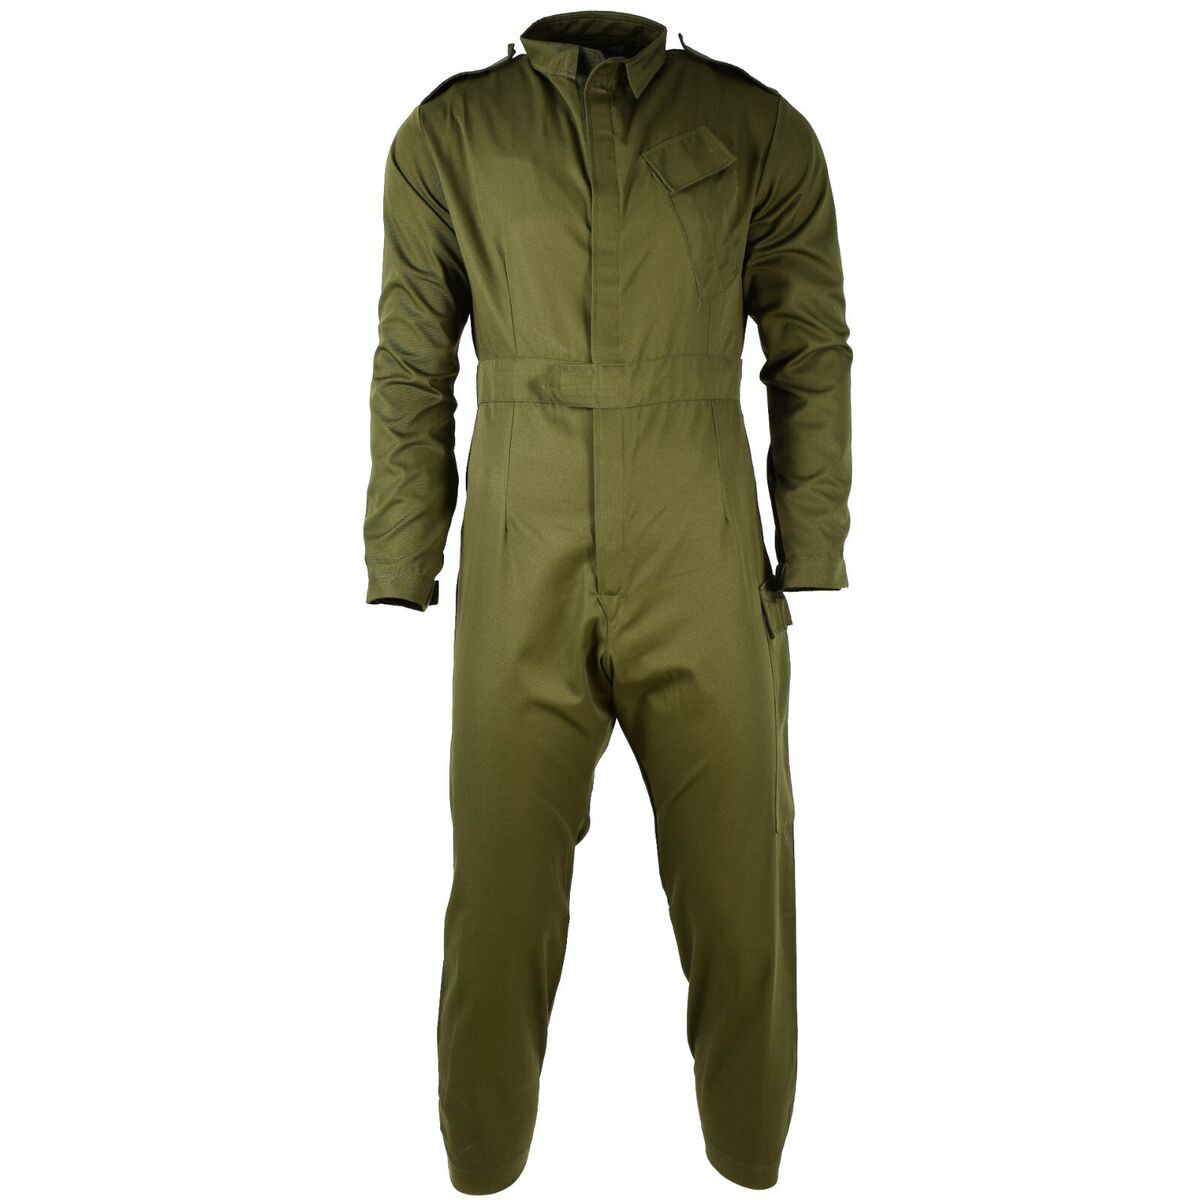 Women's New Arrivals | Jumpsuit fashion, Mechanic clothes, Coverall outfit  women